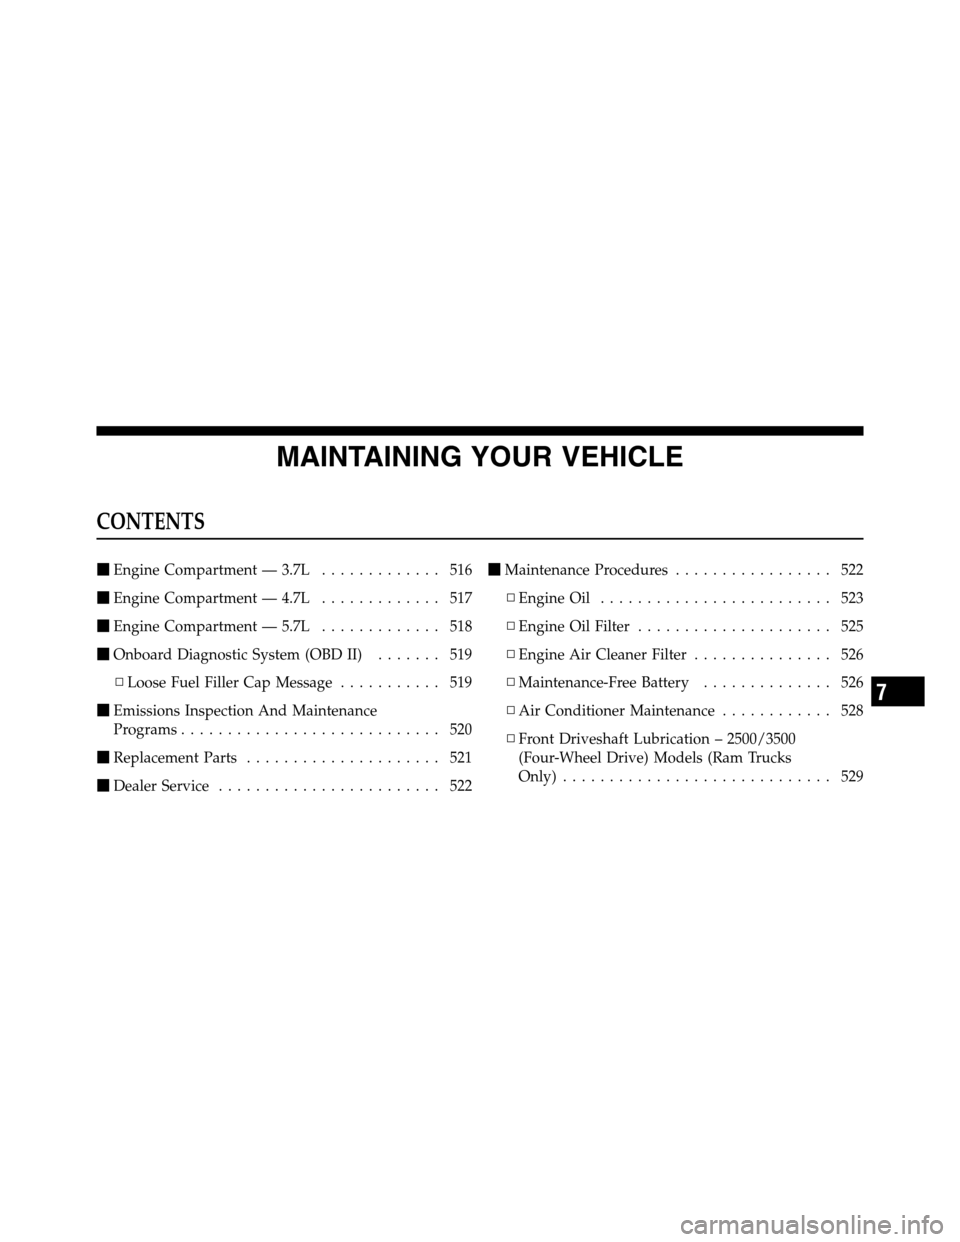 Ram 2500 2011  Owners Manual MAINTAINING YOUR VEHICLE
CONTENTS
Engine Compartment — 3.7L............. 516
Engine Compartment — 4.7L............. 517
Engine Compartment — 5.7L............. 518
Onboard Diagnostic System (